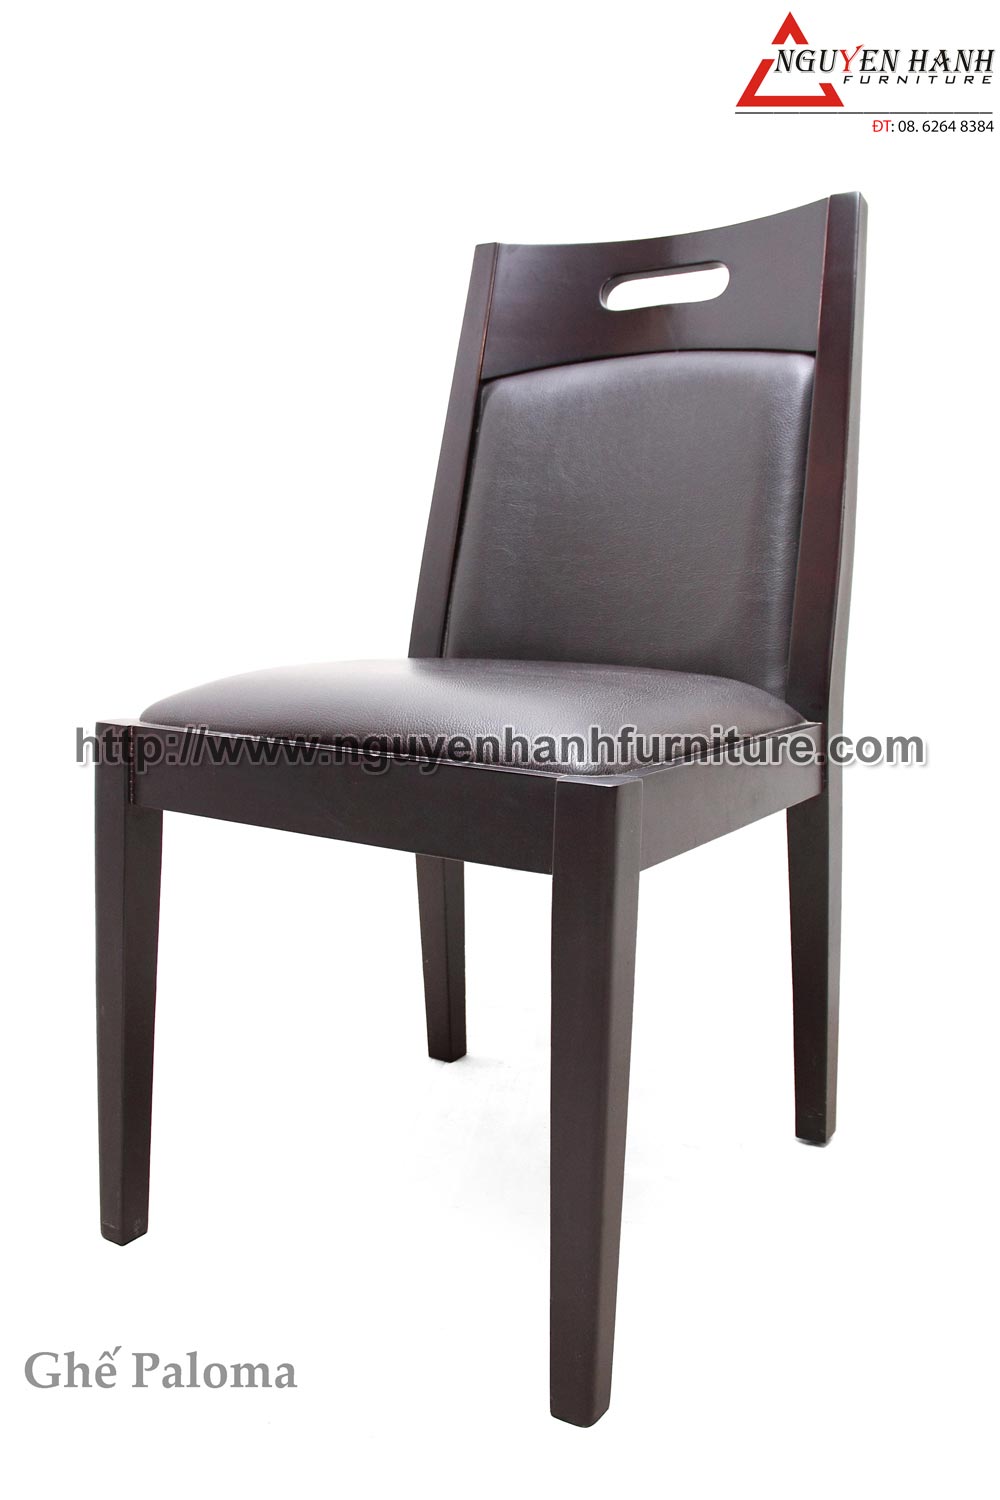 Name product: paloma chair